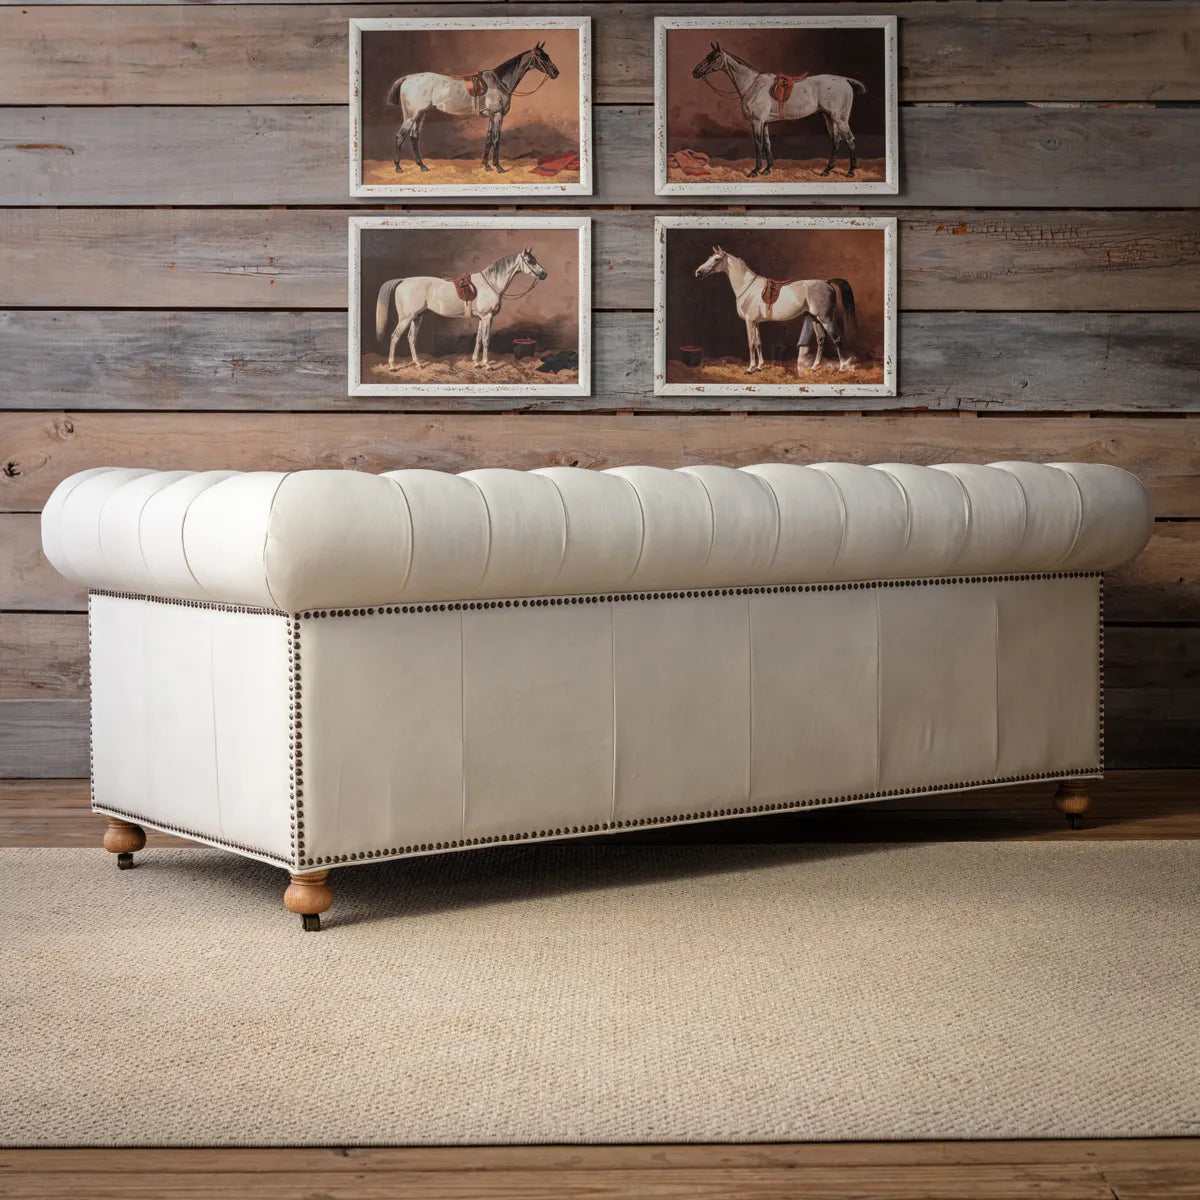 Restoration Hardware White Leather Sofas for Sale, Vintage Leather Tufted Sofa for sale